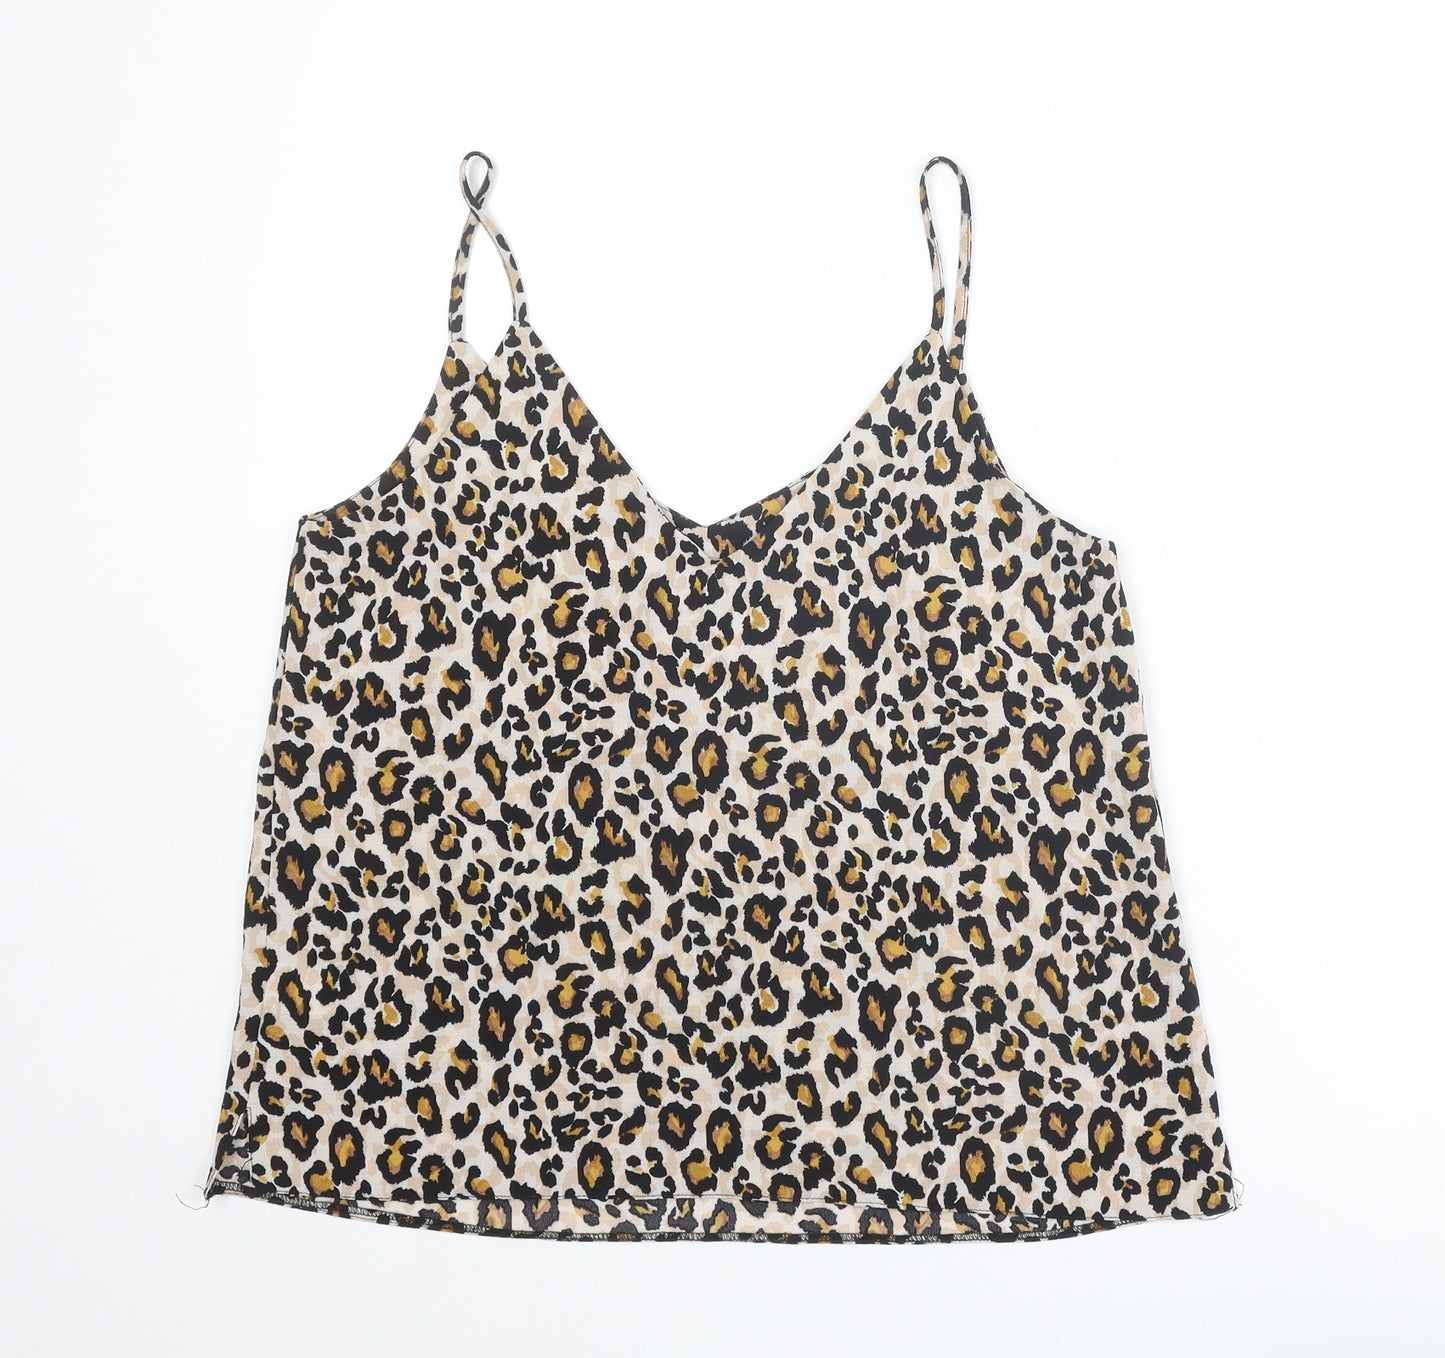 New Look Womens Beige Animal Print Polyester Camisole Tank Size 12 V-Neck - Leopard Print